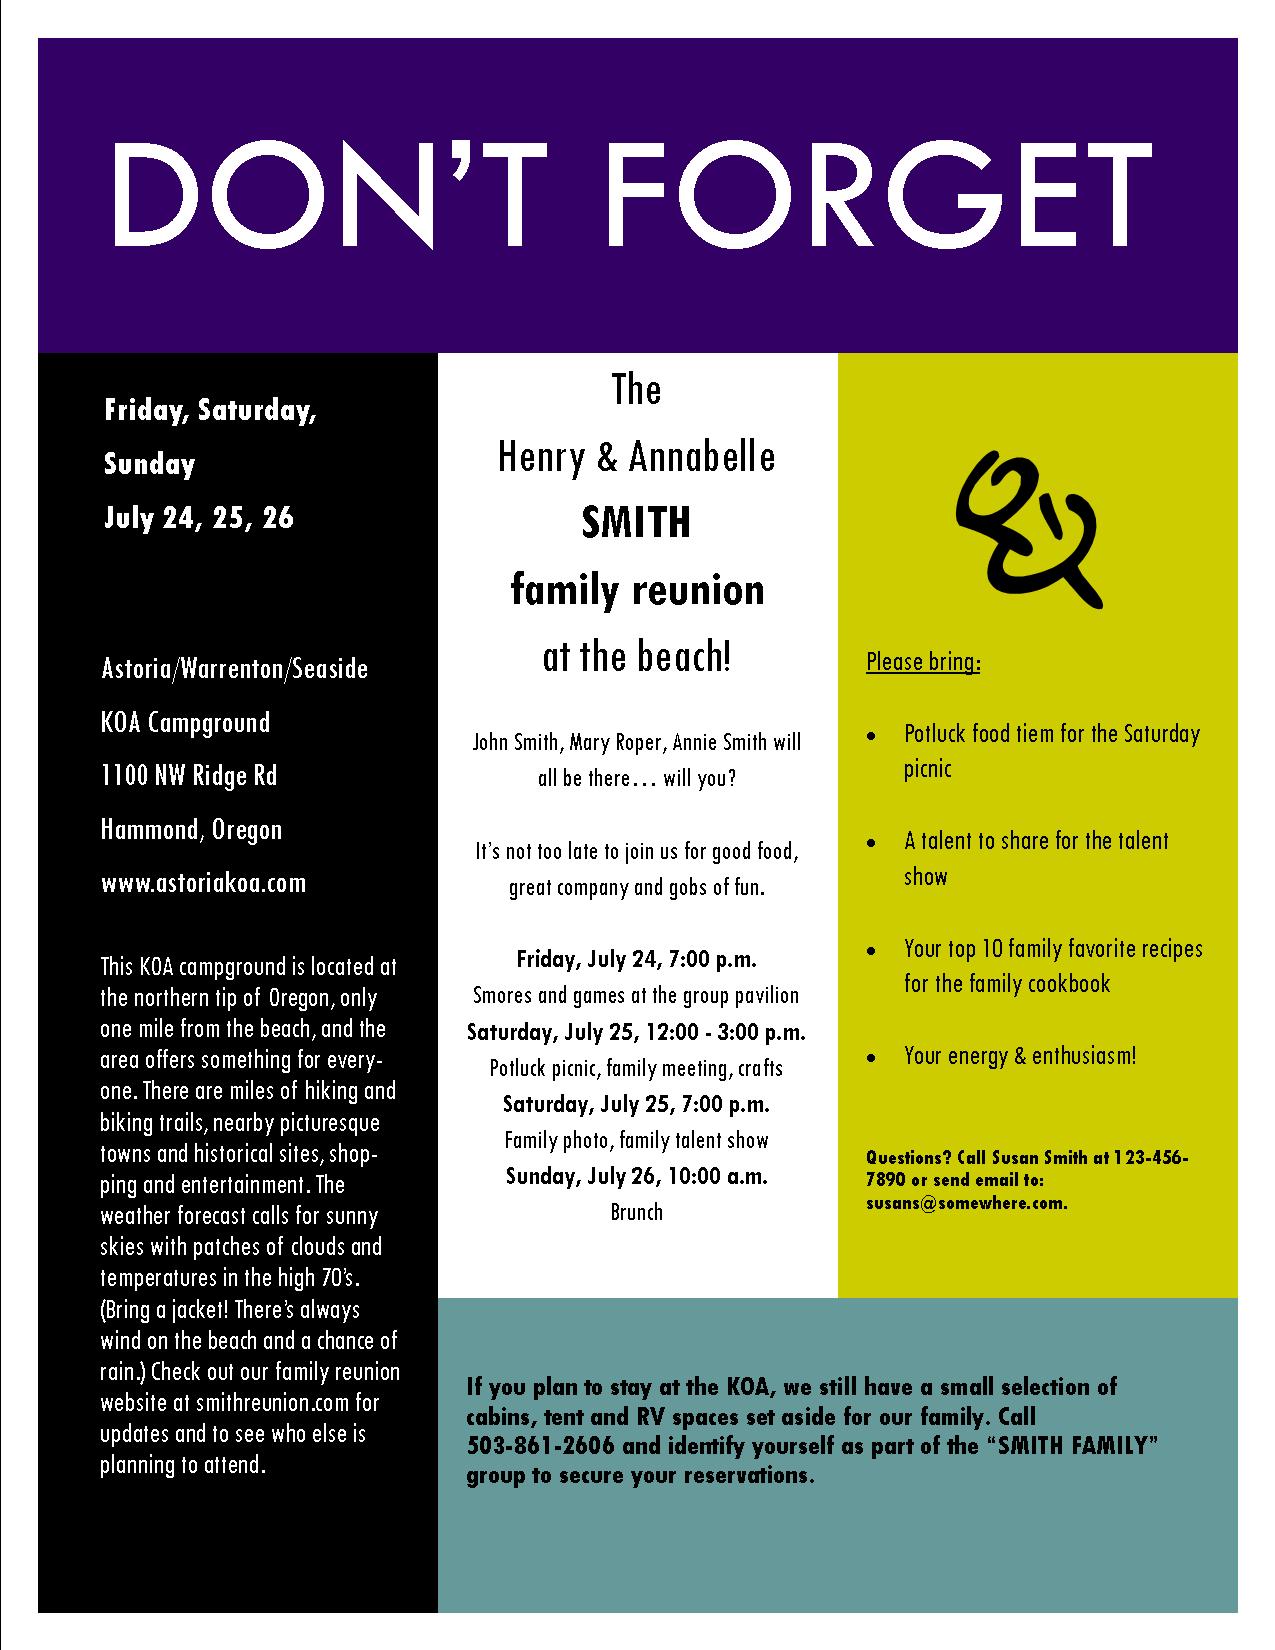 A Sample Invitation for the Family Reunion